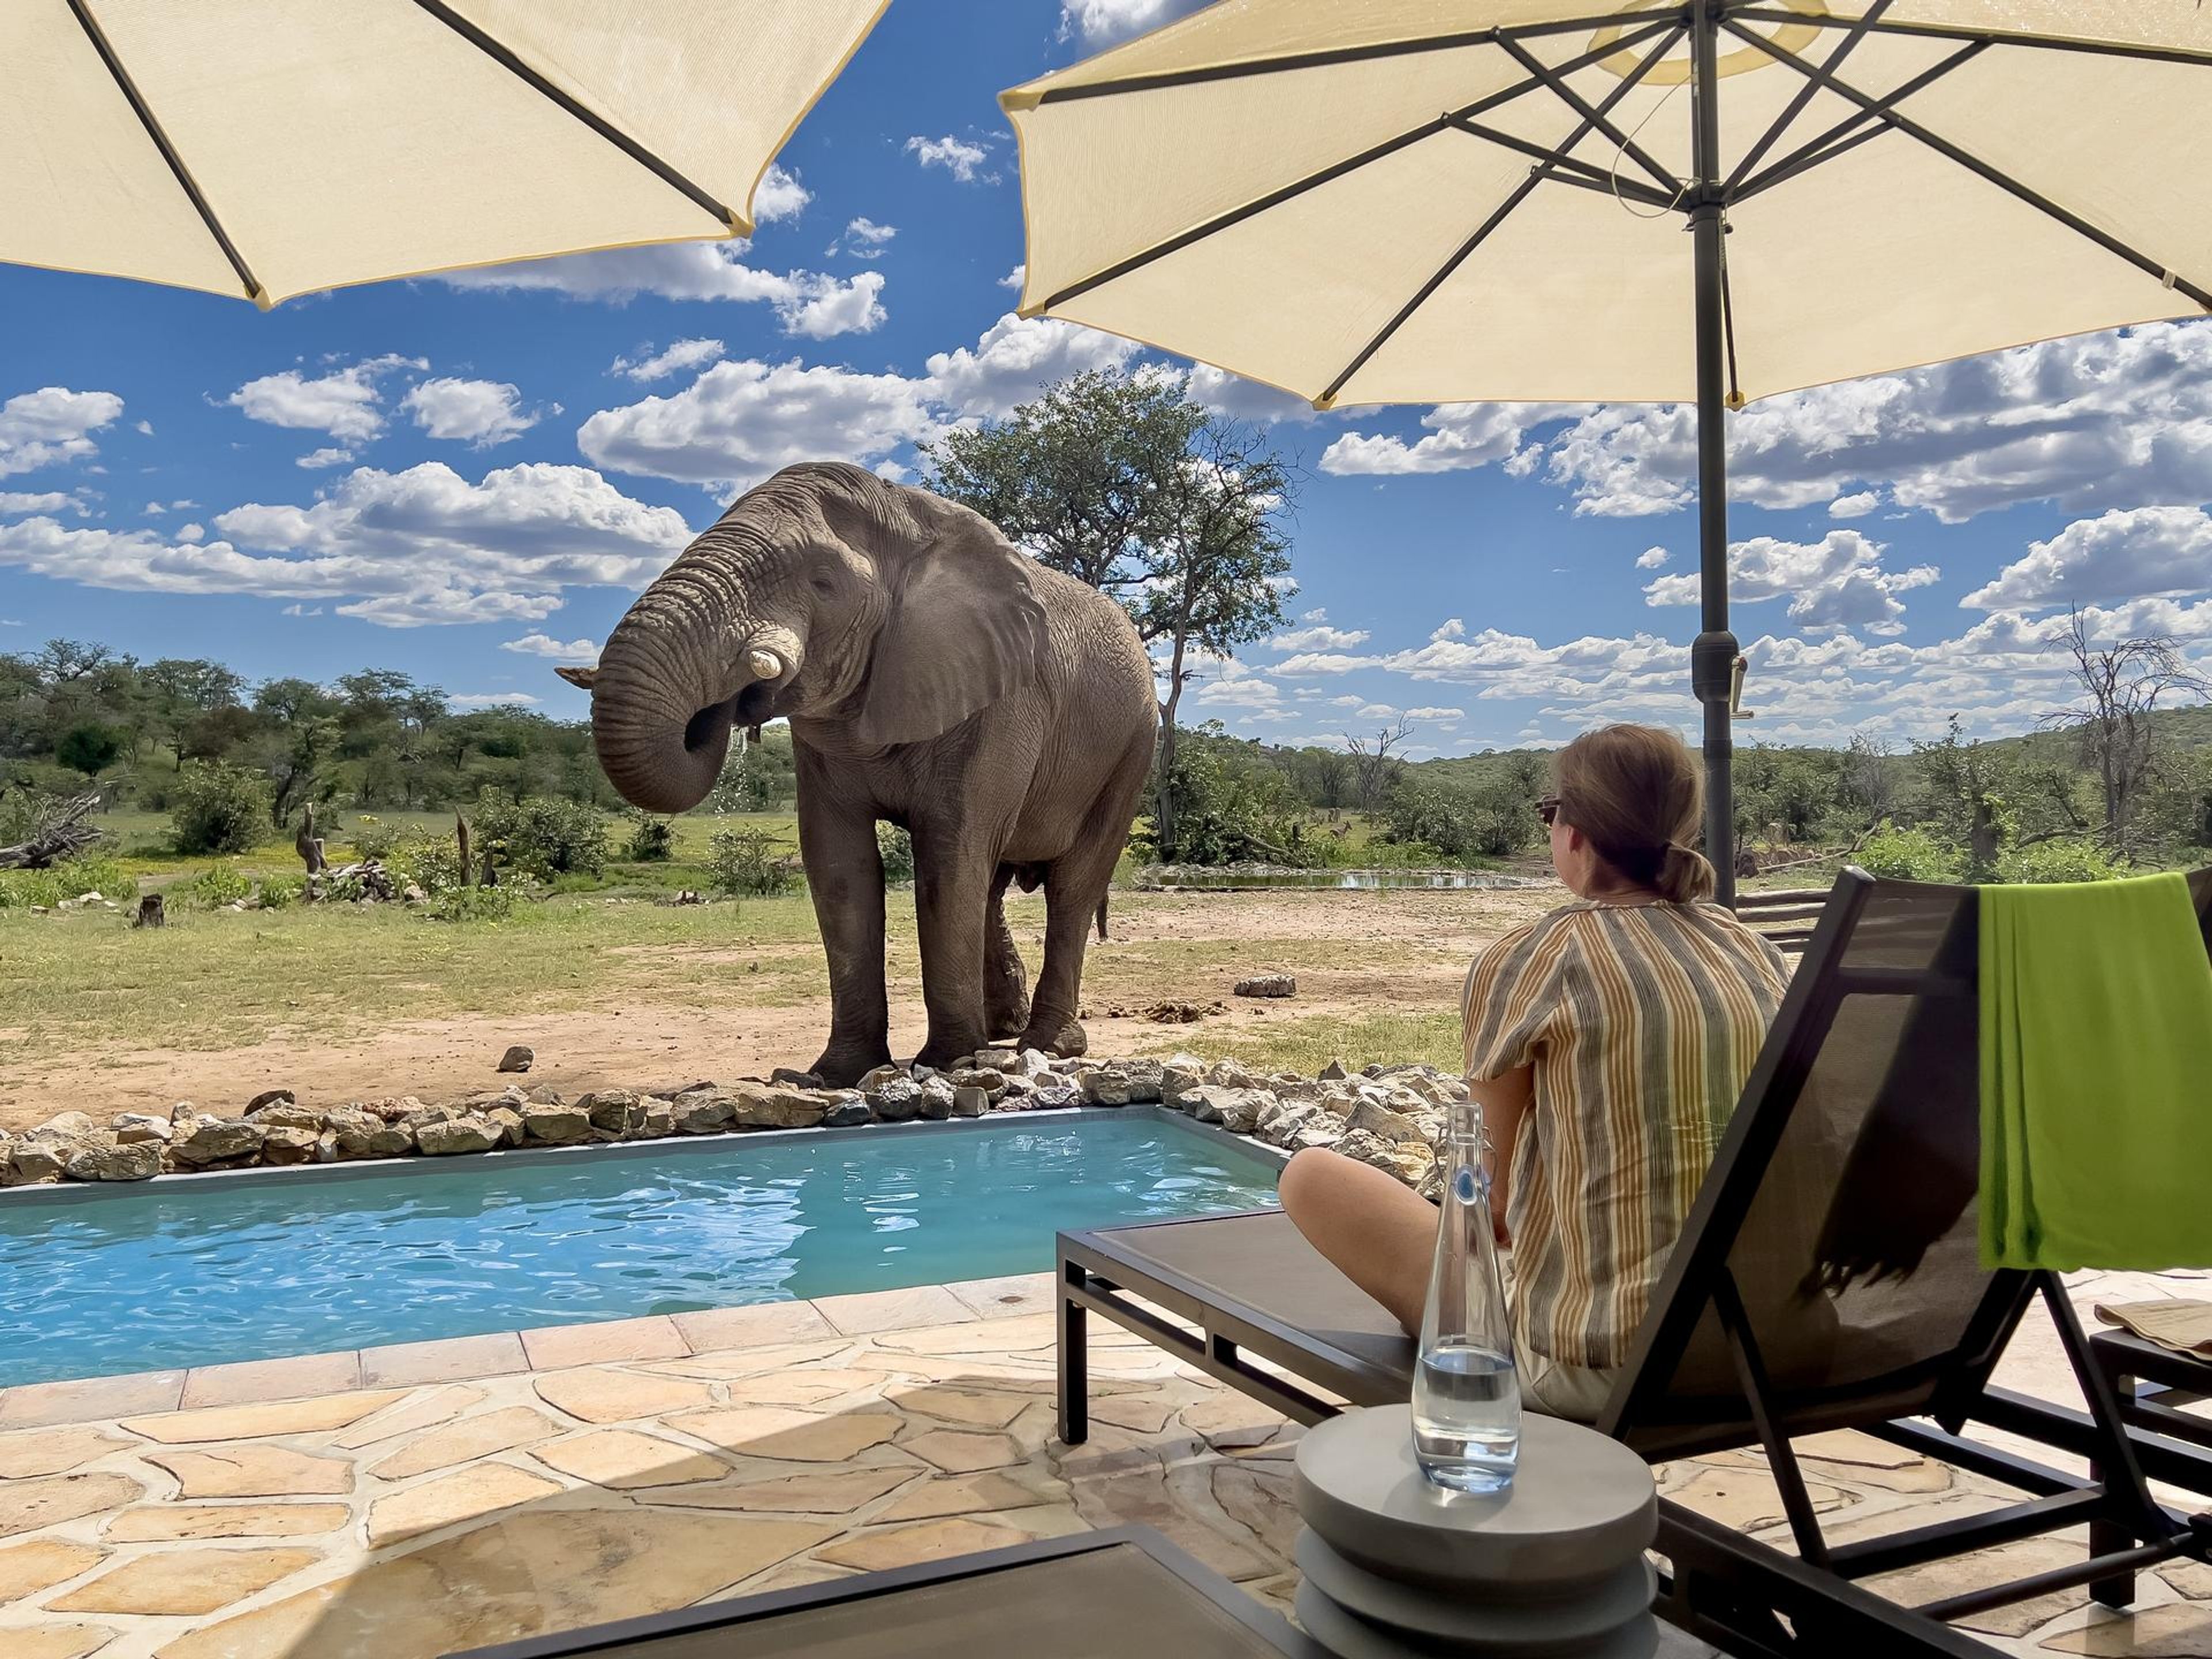 On the pool deck at Ongava Tented Camp, a close encounter with a giant of the African bush.